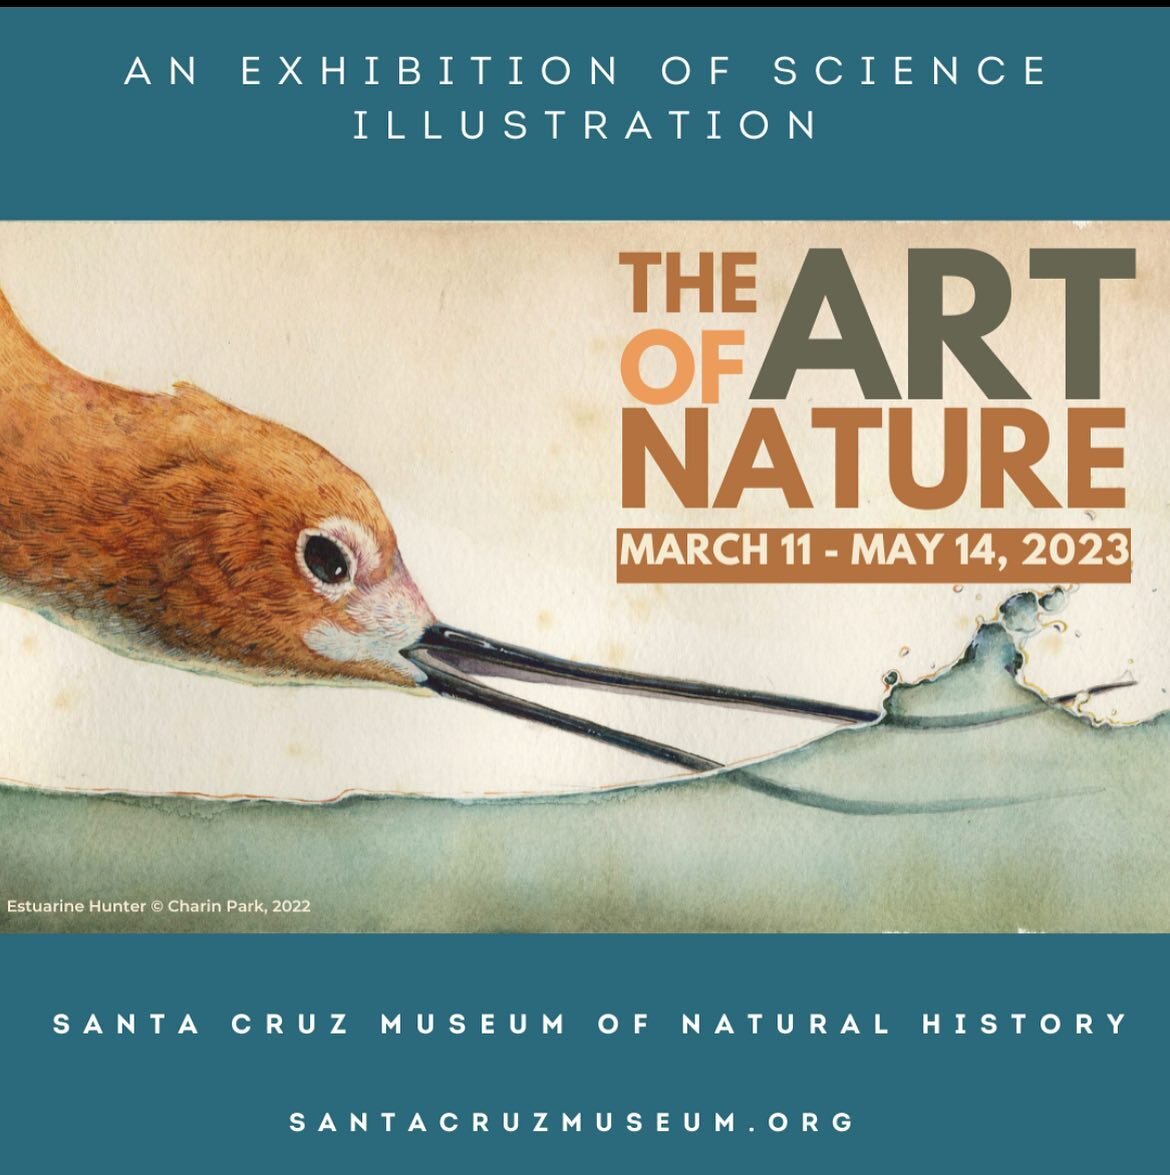 I&rsquo;m excited to be a part of this exhibit in Santa Cruz, opening March 11. I&rsquo;ll also be at the Makers Market on April 29. Cruise through if you&rsquo;re in the area!